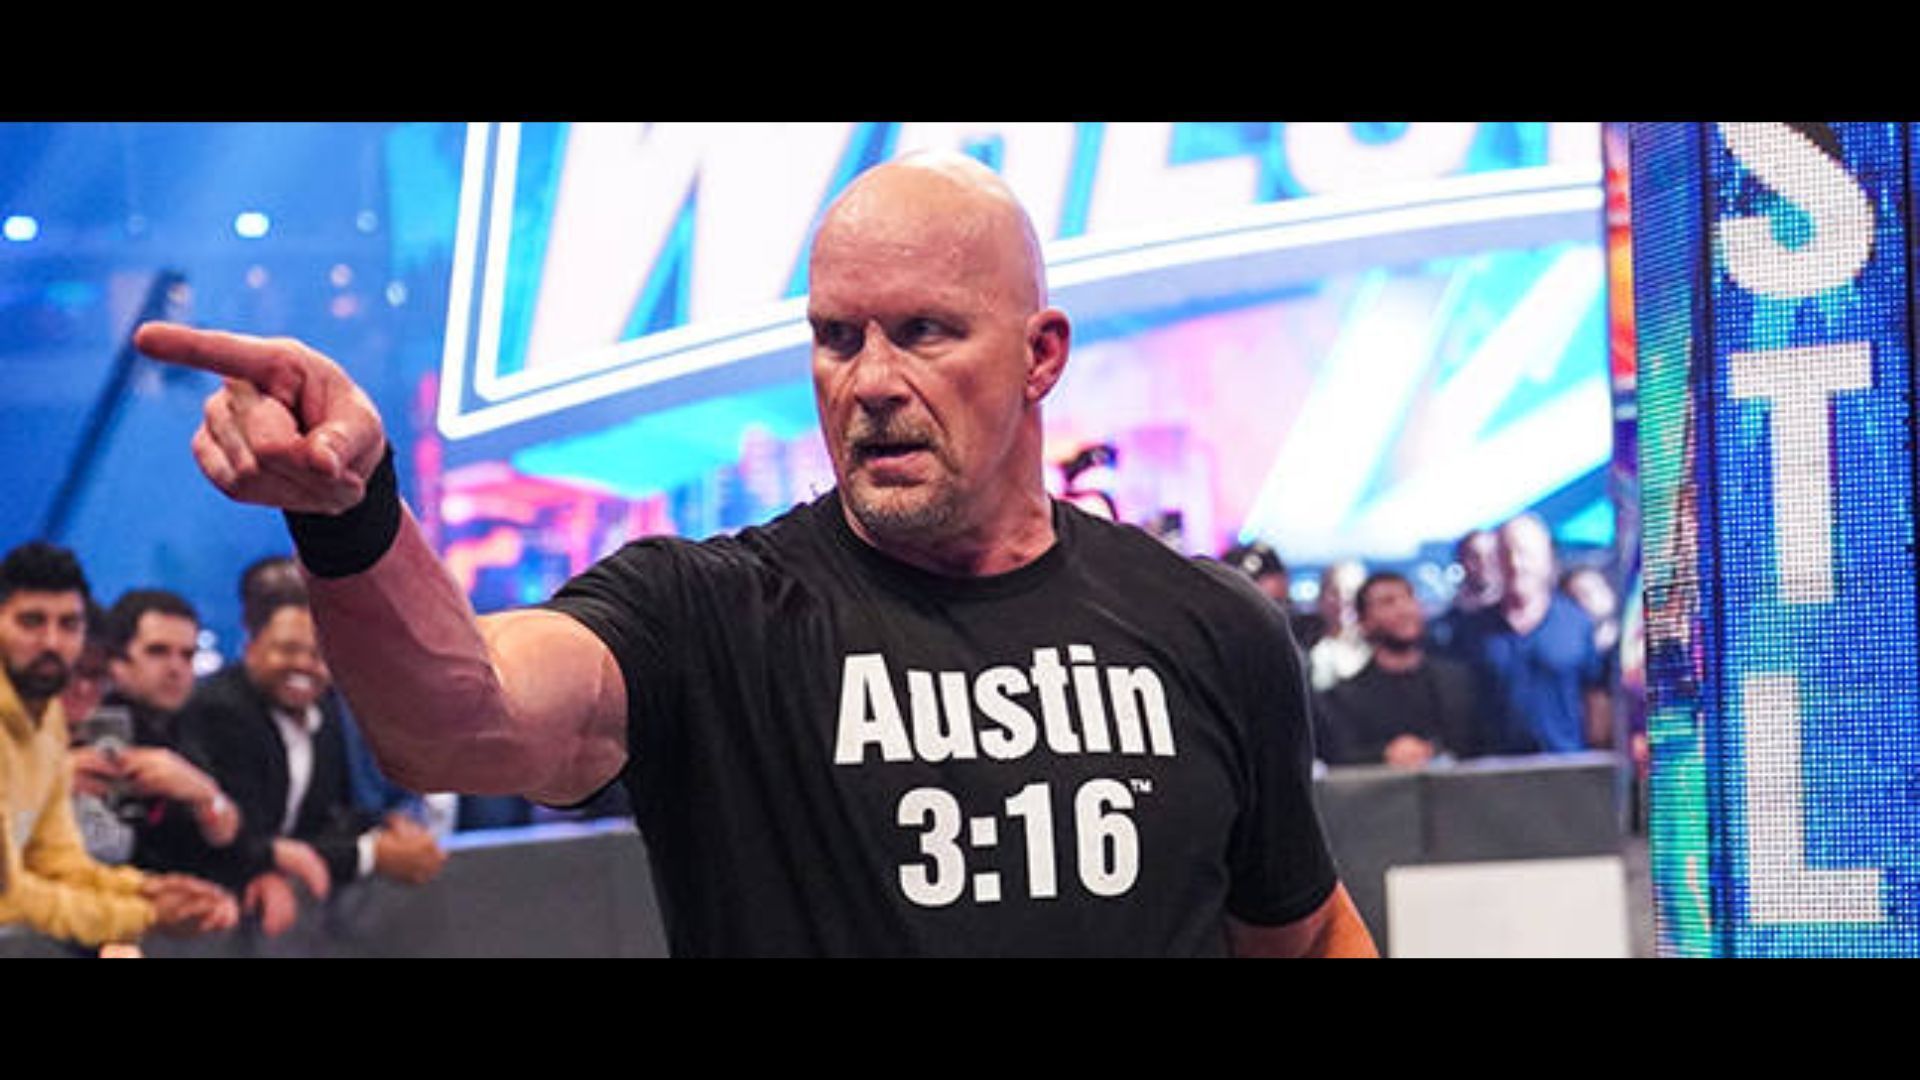 Stone Cold Steve Austin wrestled at Mania last year, and may do so again this year